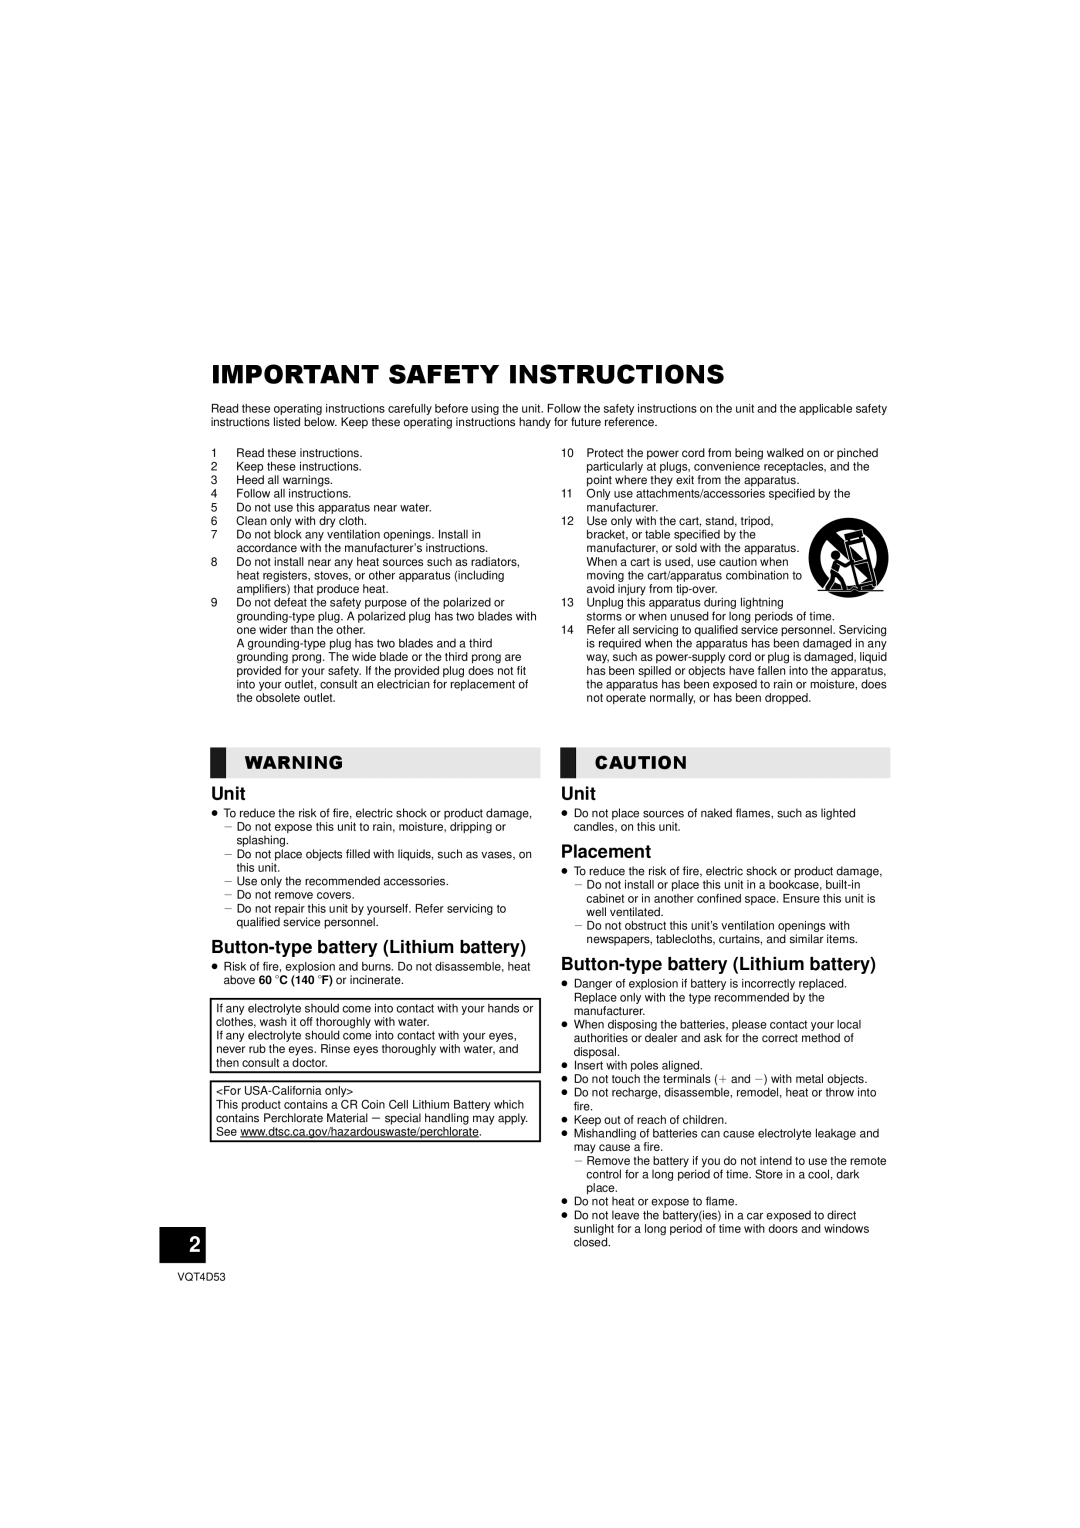 Panasonic SC-HTB20 owner manual Important Safety Instructions, Unit, Button-typebattery Lithium battery, Placement 